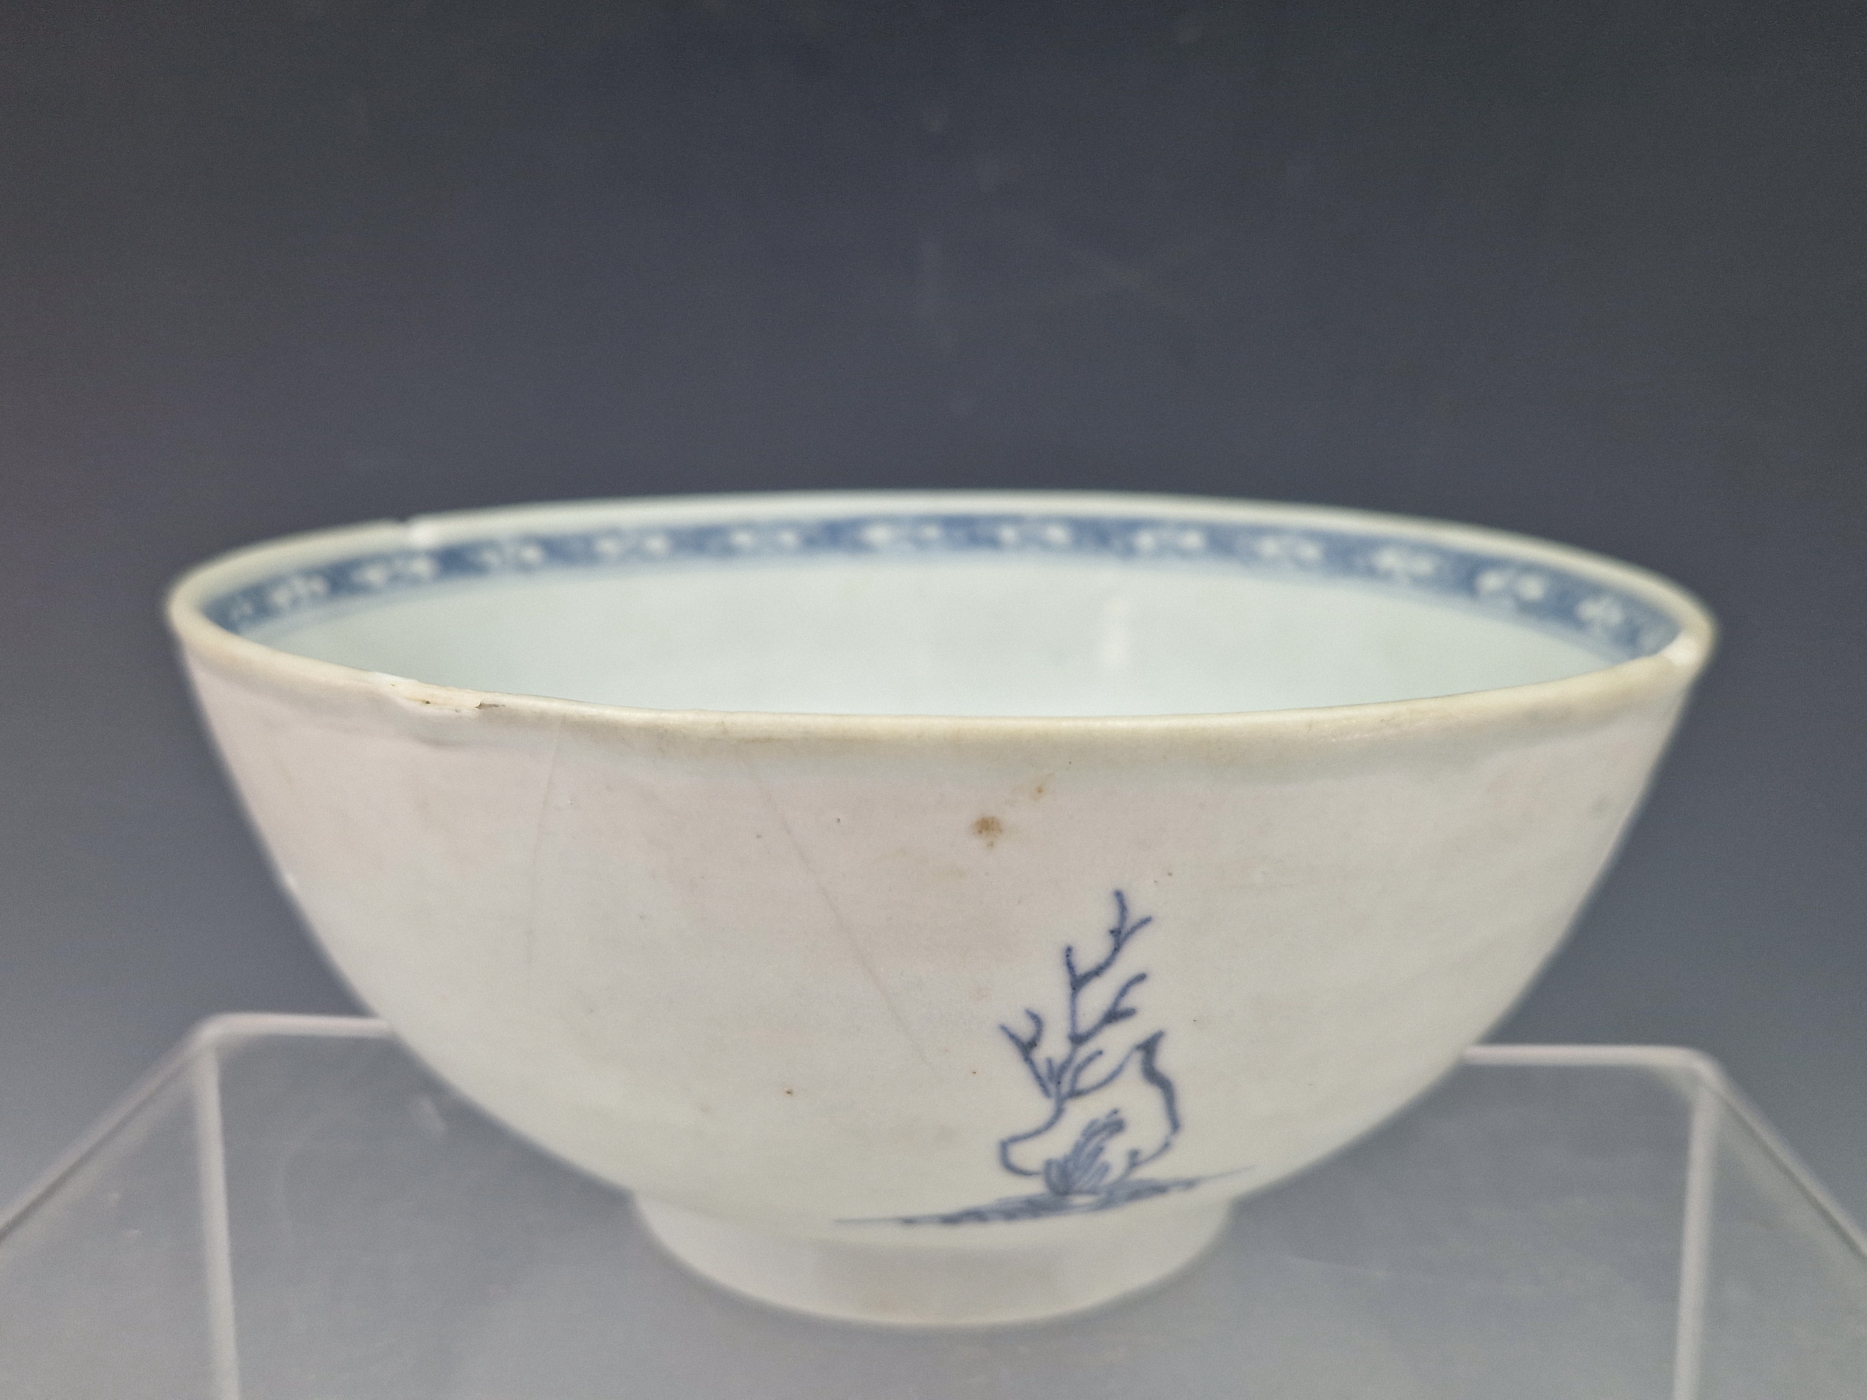 A NANKING CARGO BLUE AND WHITE BOWL, THE EXTERIOR PAINTED WITH ISLANDS, CHRISTIES LABEL FOR LOT - Image 3 of 4